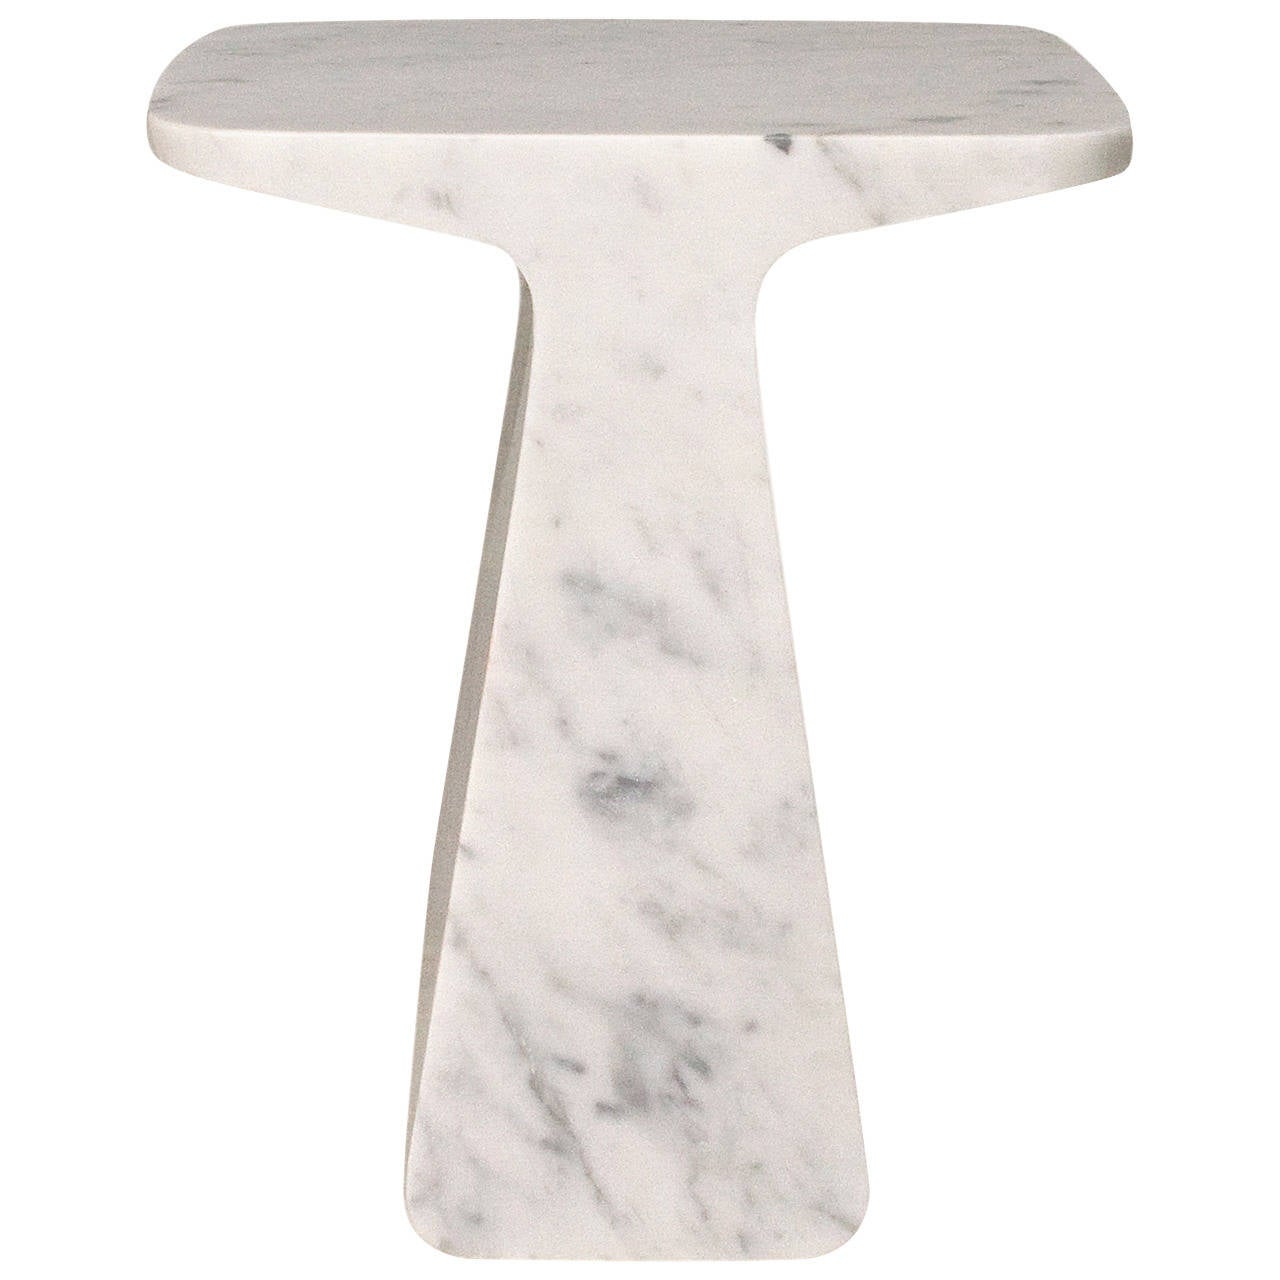 Adolfo Abejon sculpted marble stool.
Solid marble,
circa 2010, Spain.
A sculpture a stool.
From a limited series of eight.
Excellent condition.